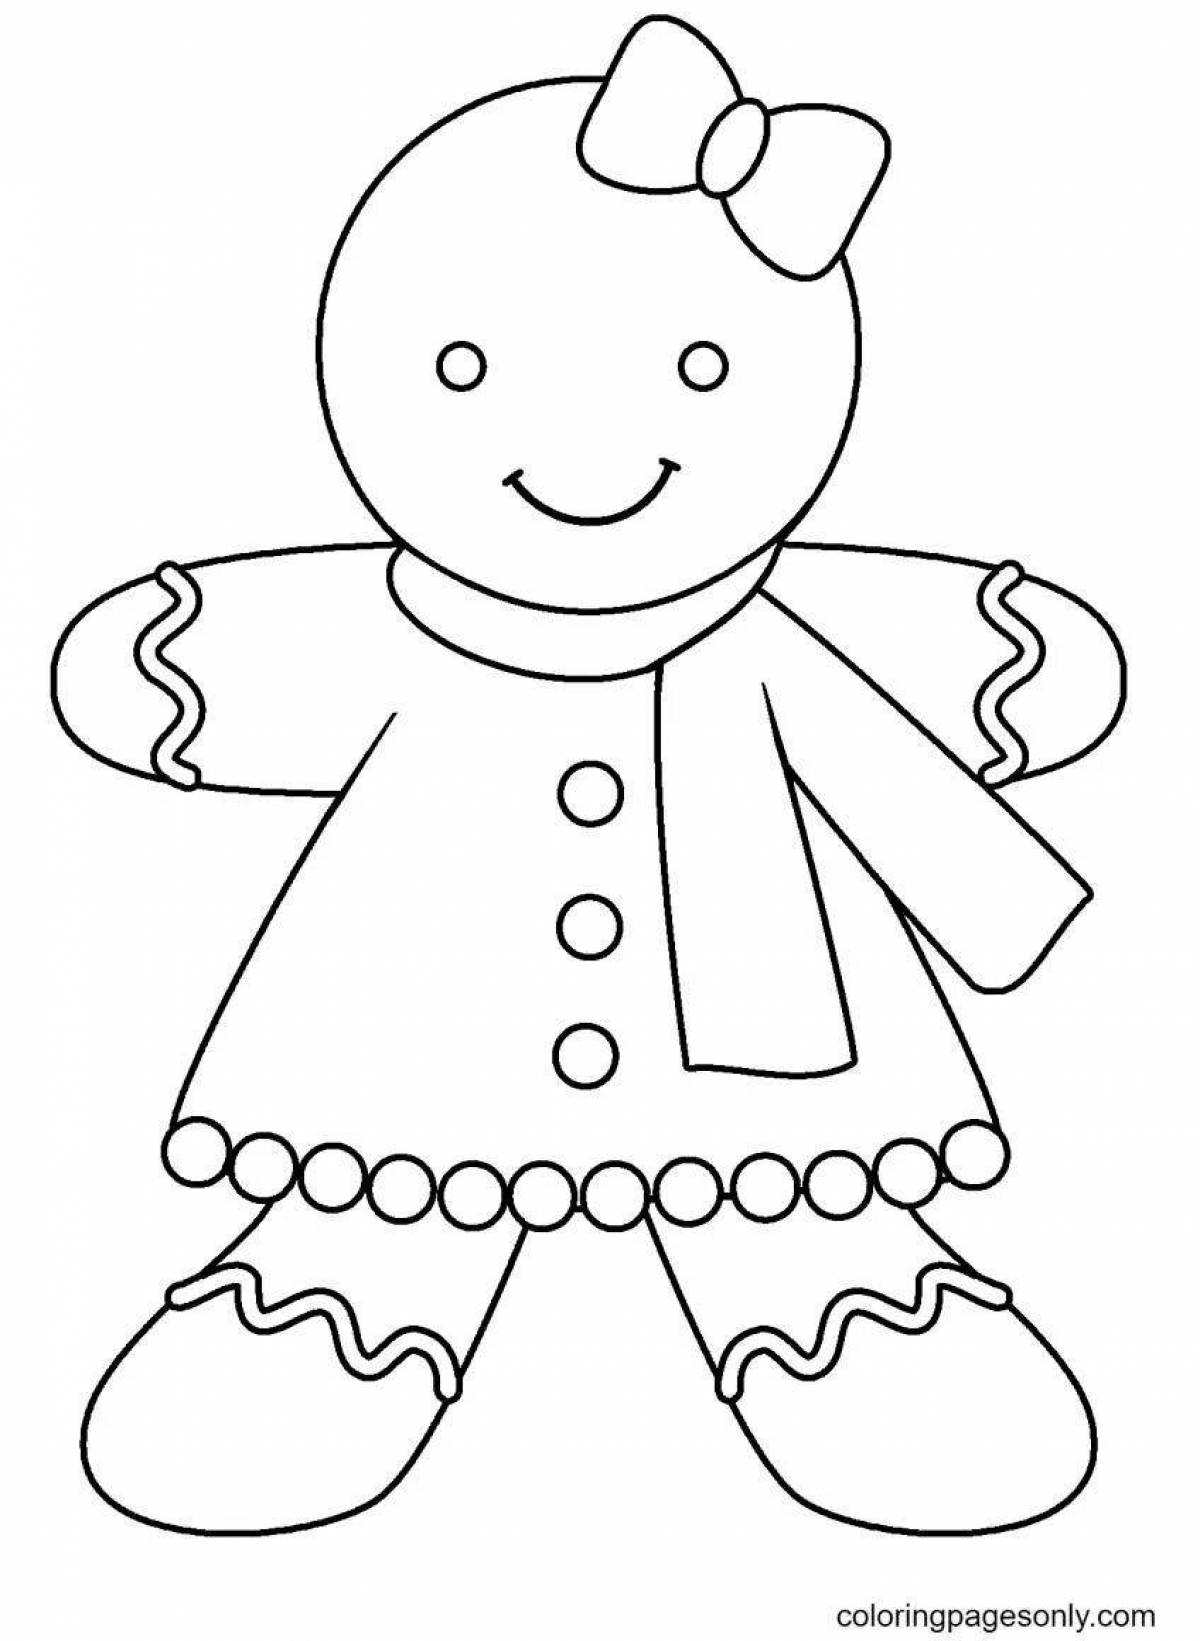 Animated gingerbread coloring book